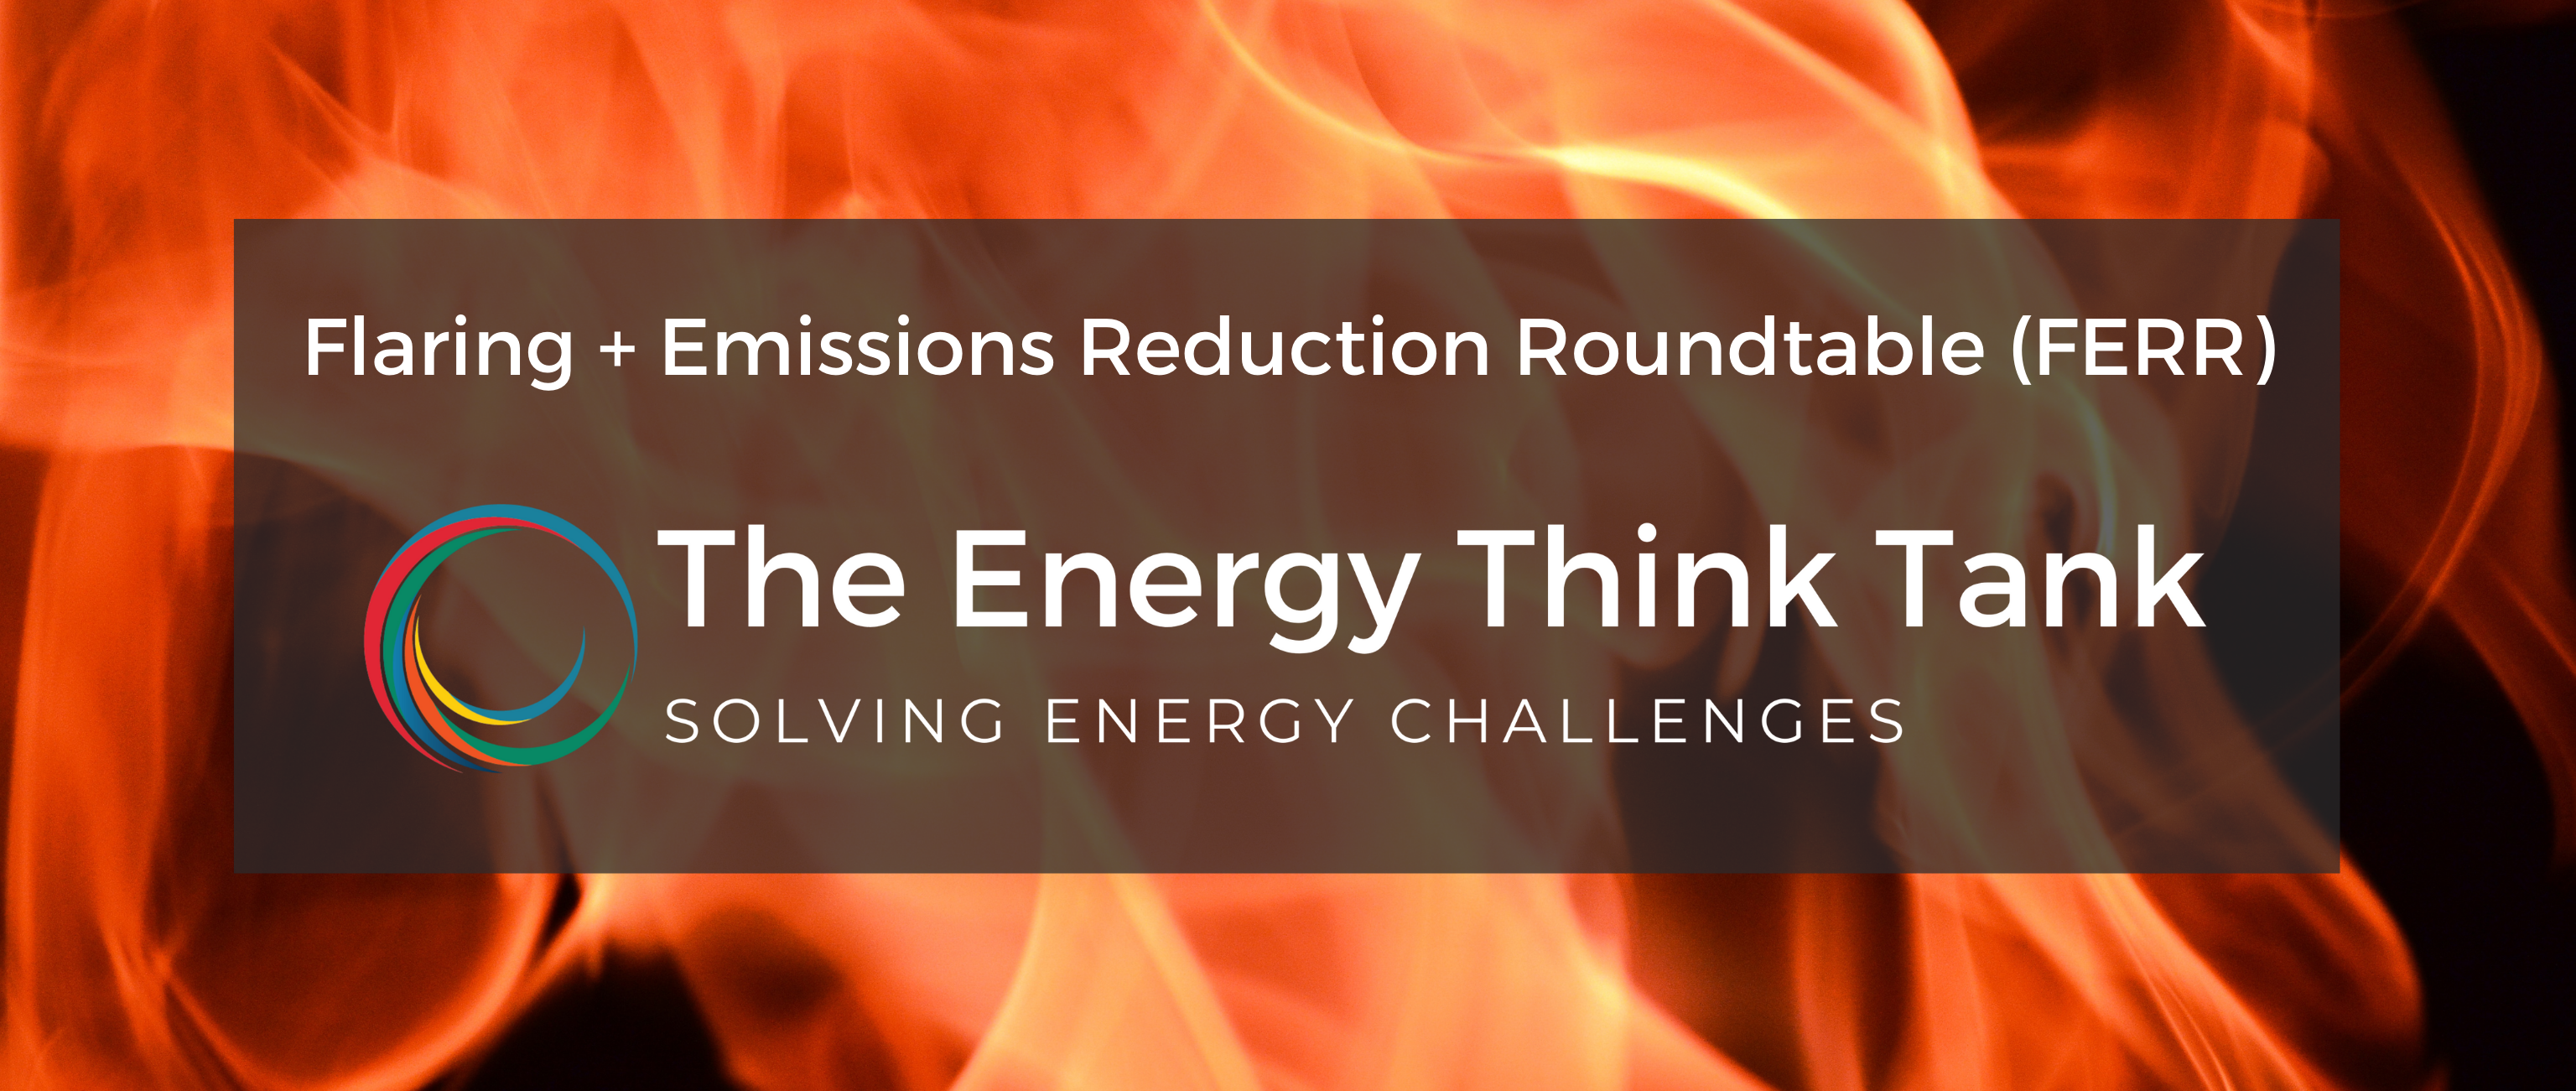 Flaring and Emissions Reduction Roundtable (FERR) The Energy Think Tank